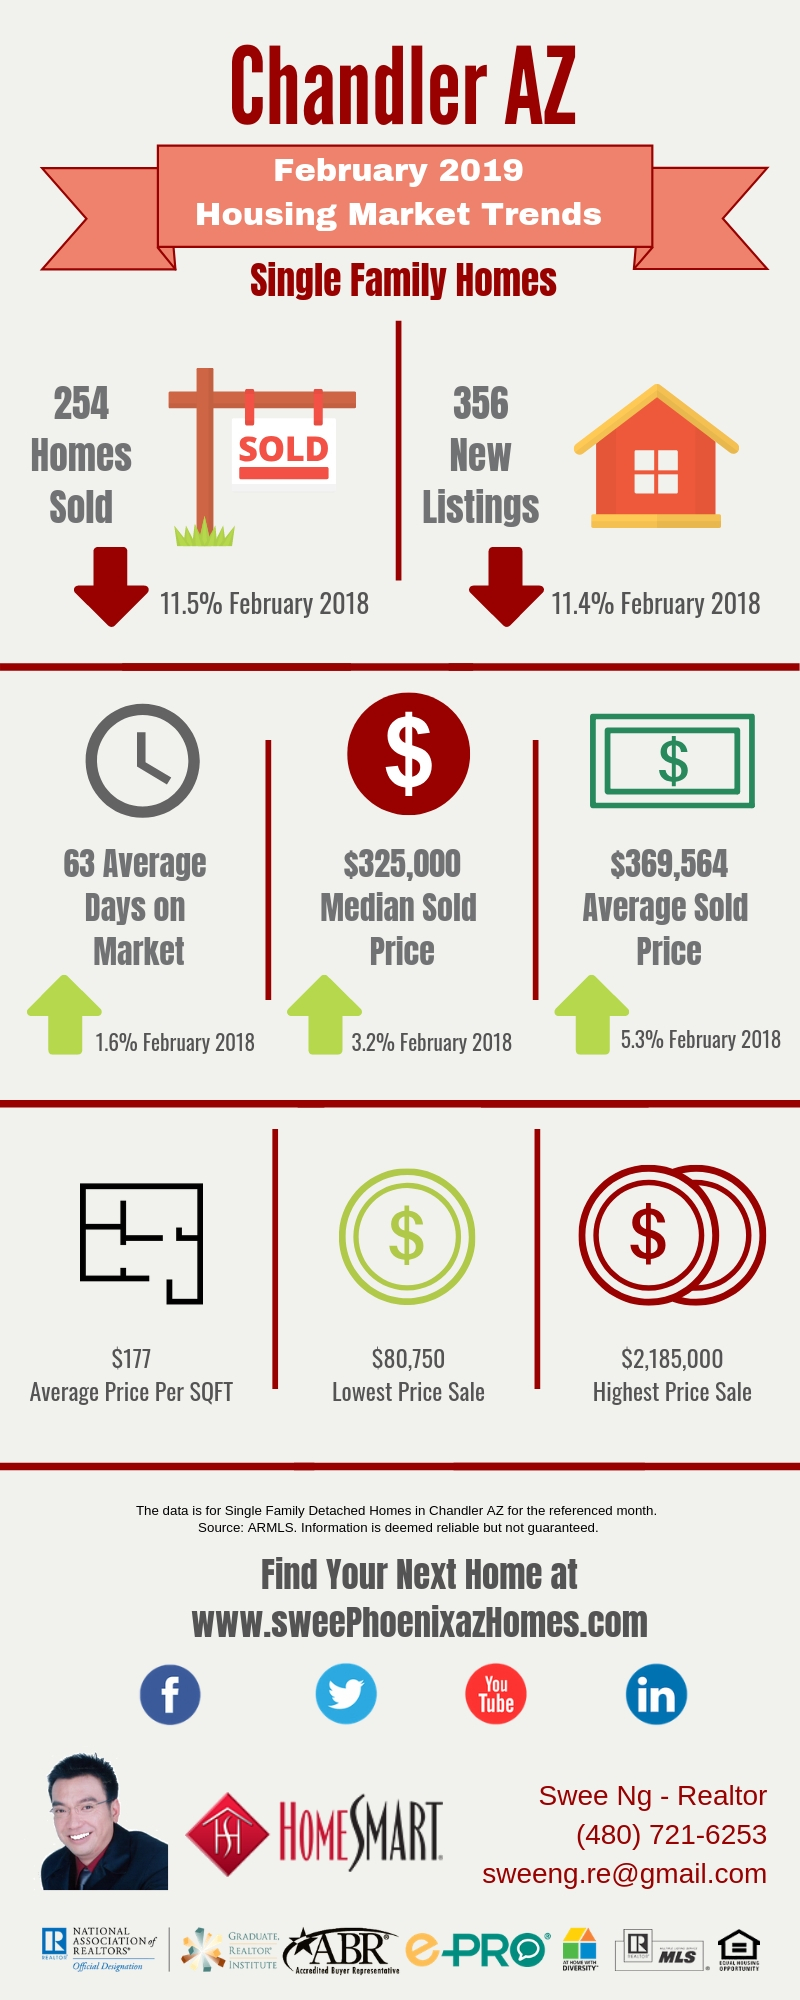 Chandler AZ Housing Market Update February 2019 by Swee Ng, House Value and Real Estate Listings